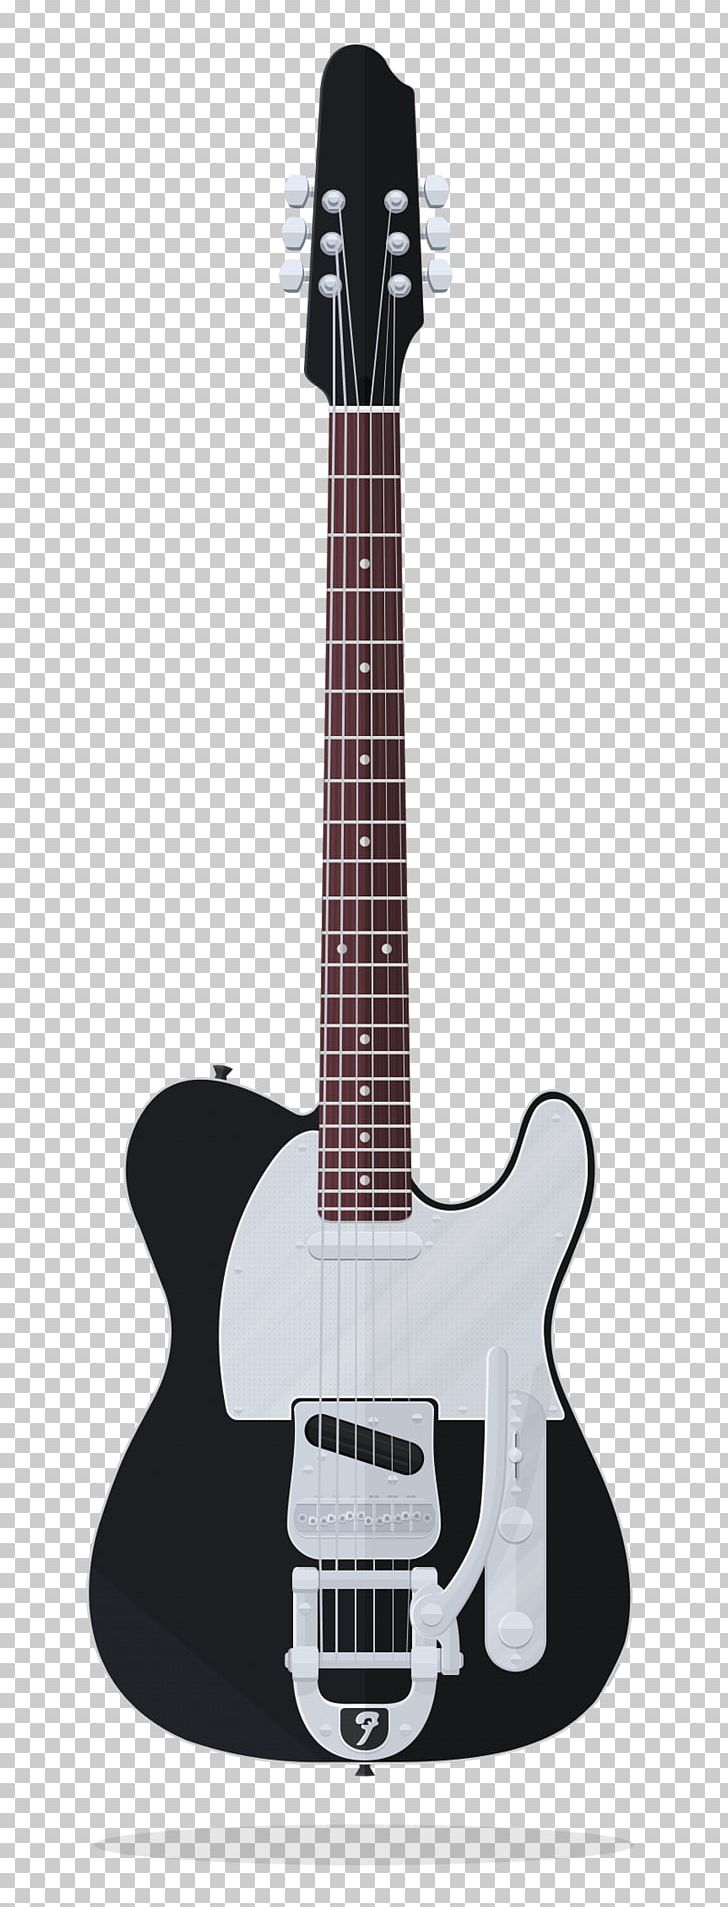 Fender Telecaster Fender J5 Telecaster Fender Stratocaster Guitar Musical Instruments PNG, Clipart, Acoustic Electric Guitar, Acoustic Guitar, Bass, Guitar, Guitar Accessory Free PNG Download